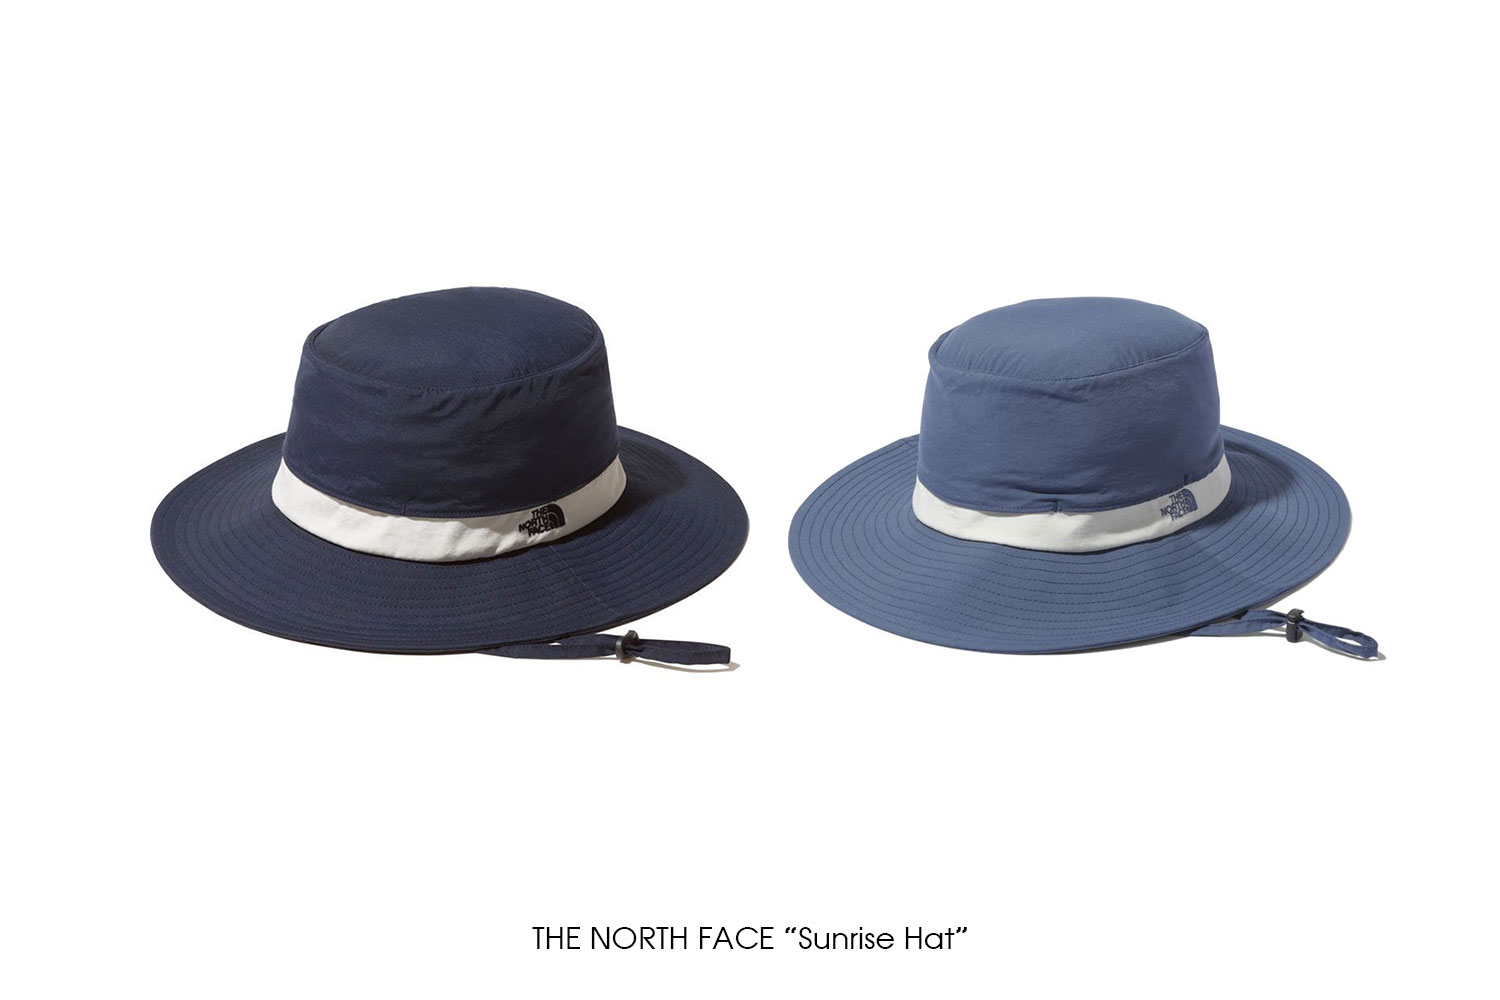 THE NORTH FACE "Sunrise Hat"